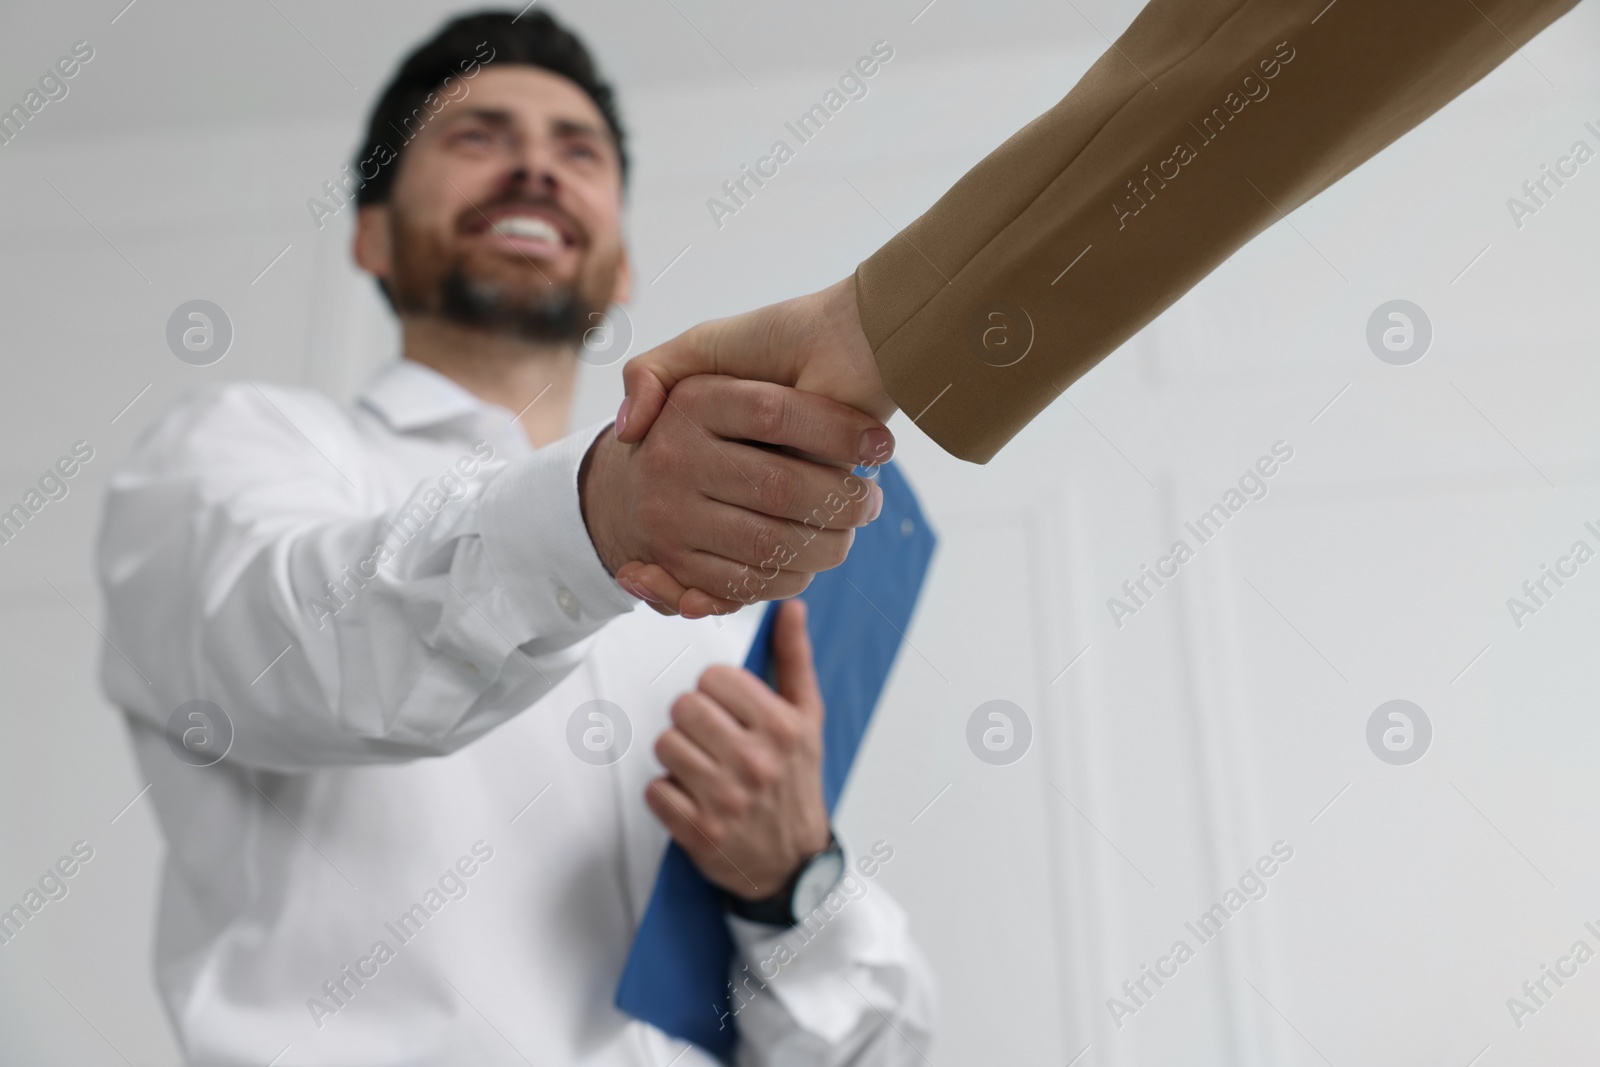 Photo of Human resources manager shaking hands with applicant during job interview in office, selective focus